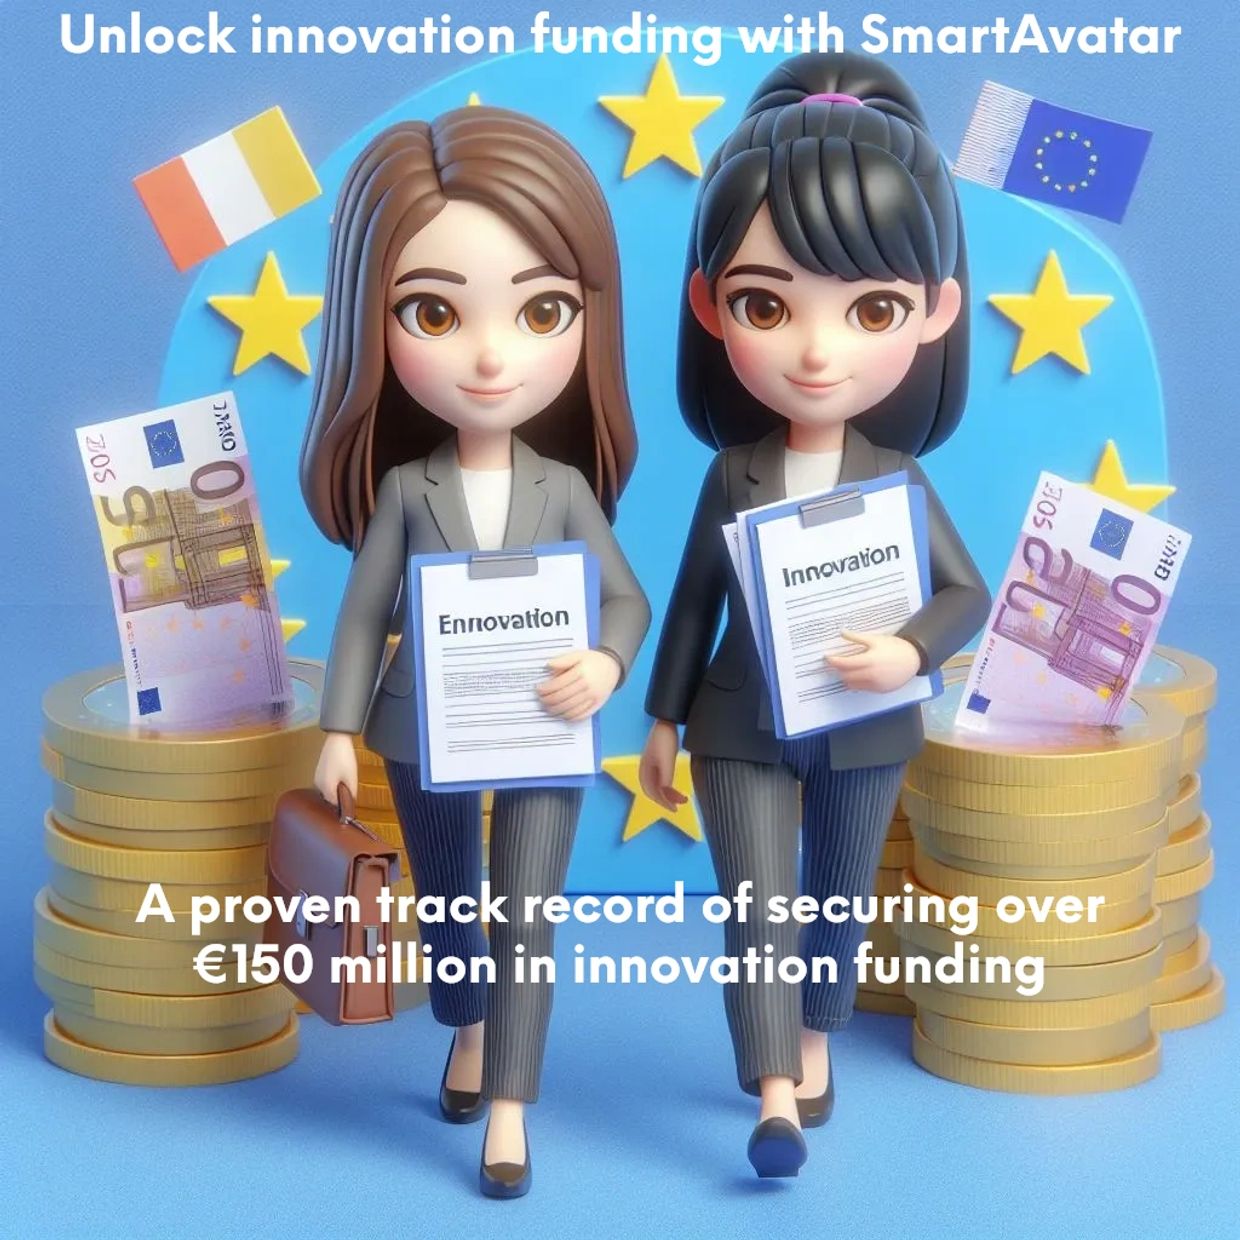 SmartAvatar led and coordinated more than 35 funded multi-partner projects valued at €150 million.